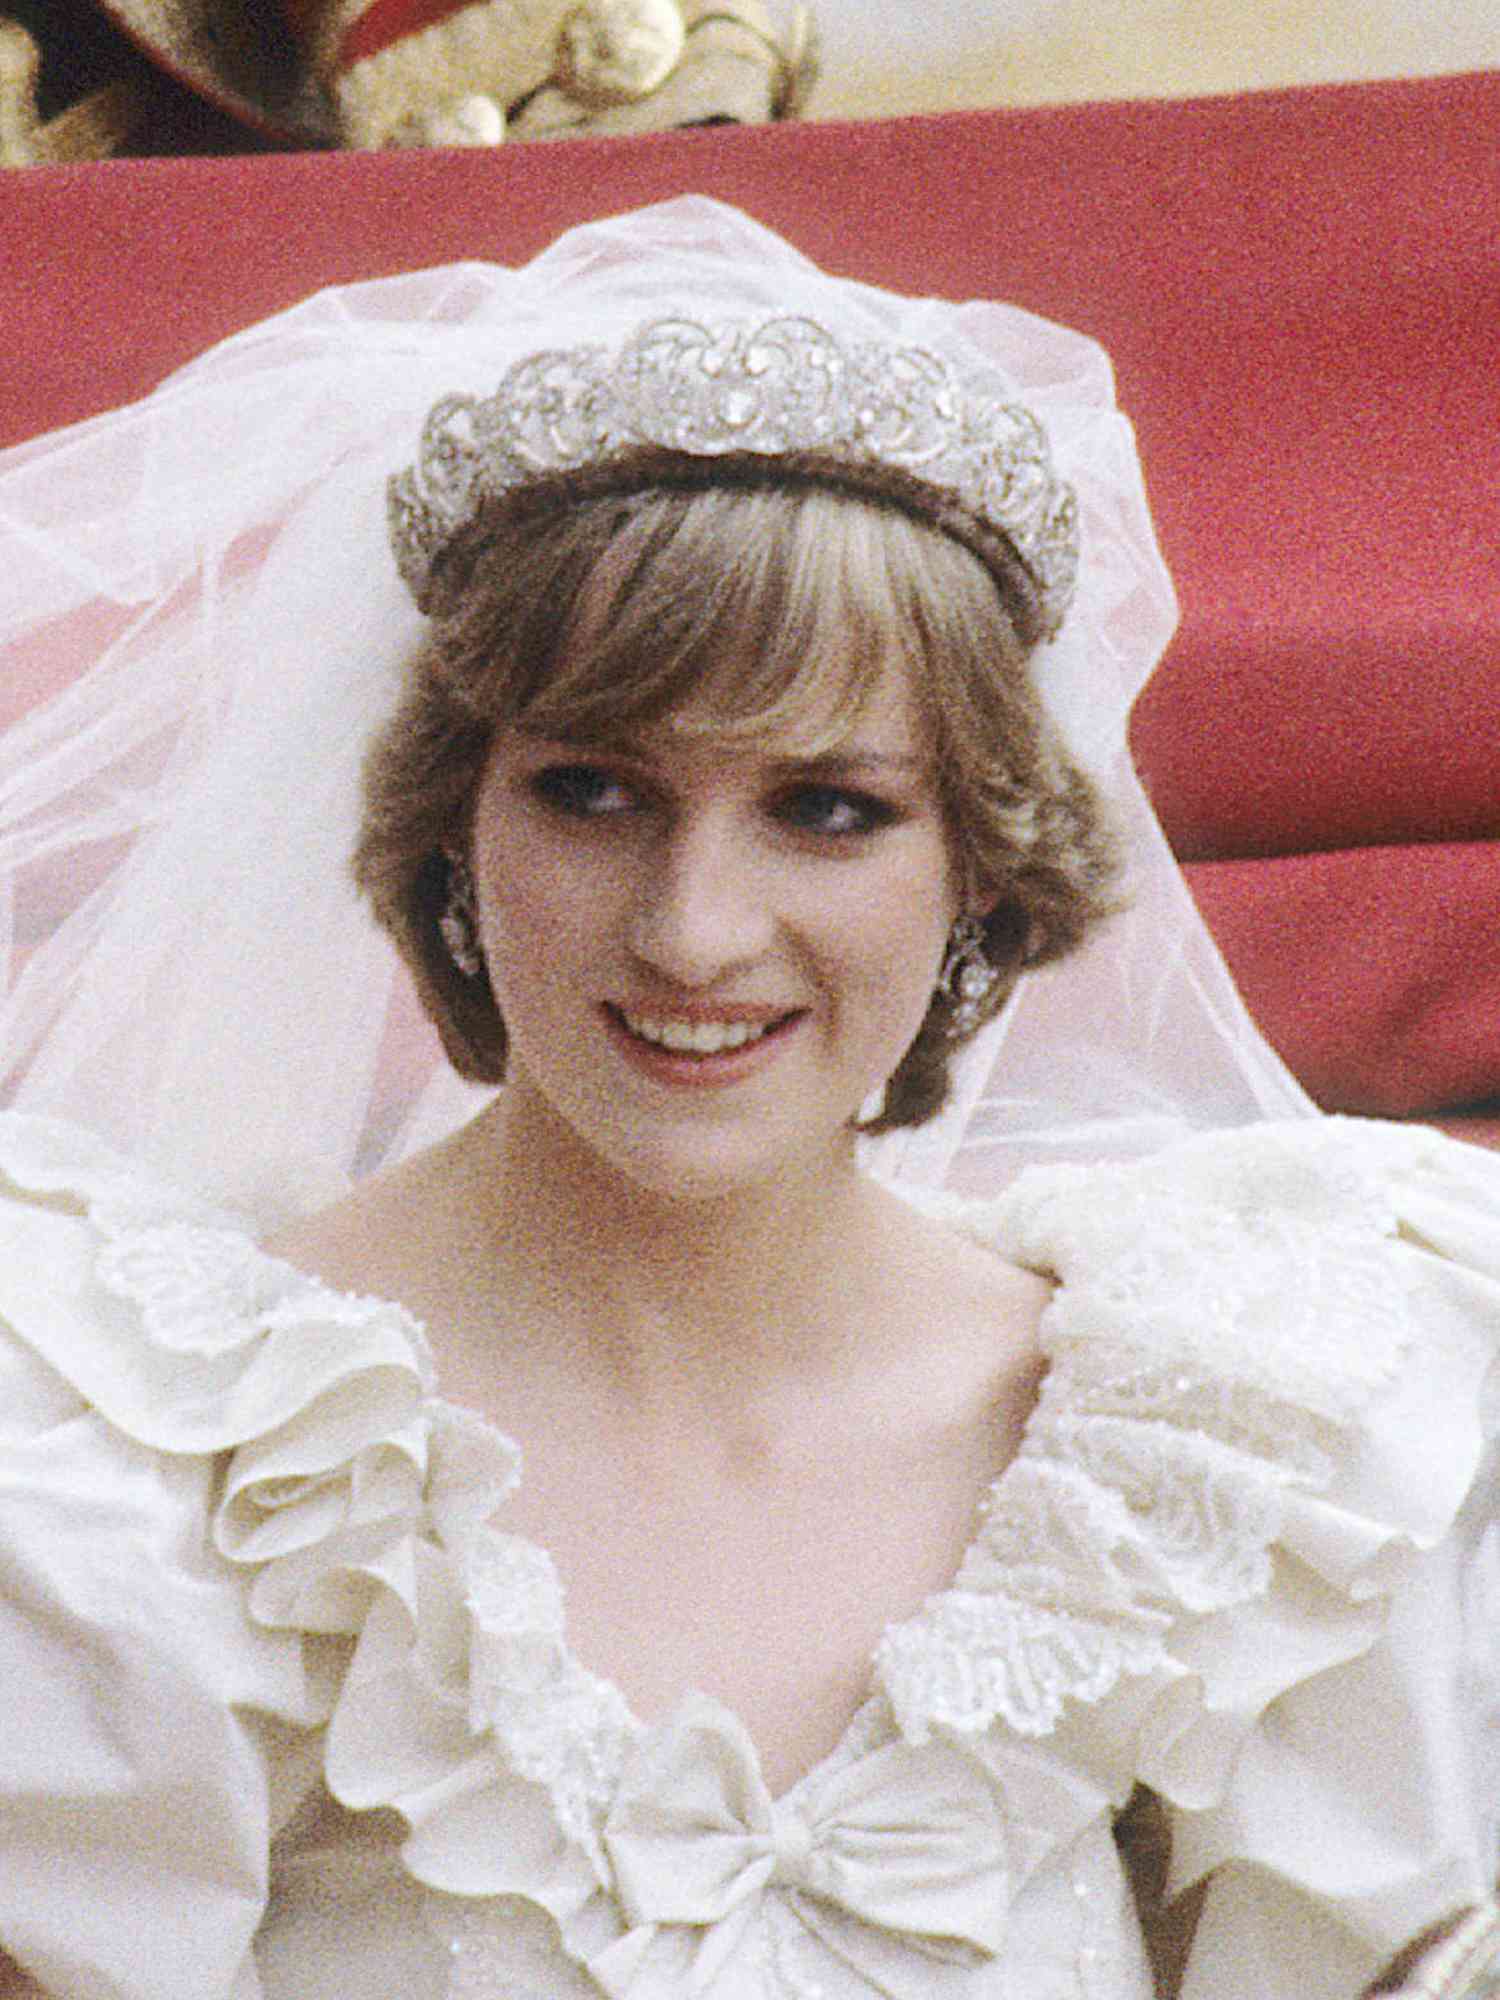 Princess Diana wearing a flippy short hairstyle with bangs, a tiara, and a veil on her wedding day